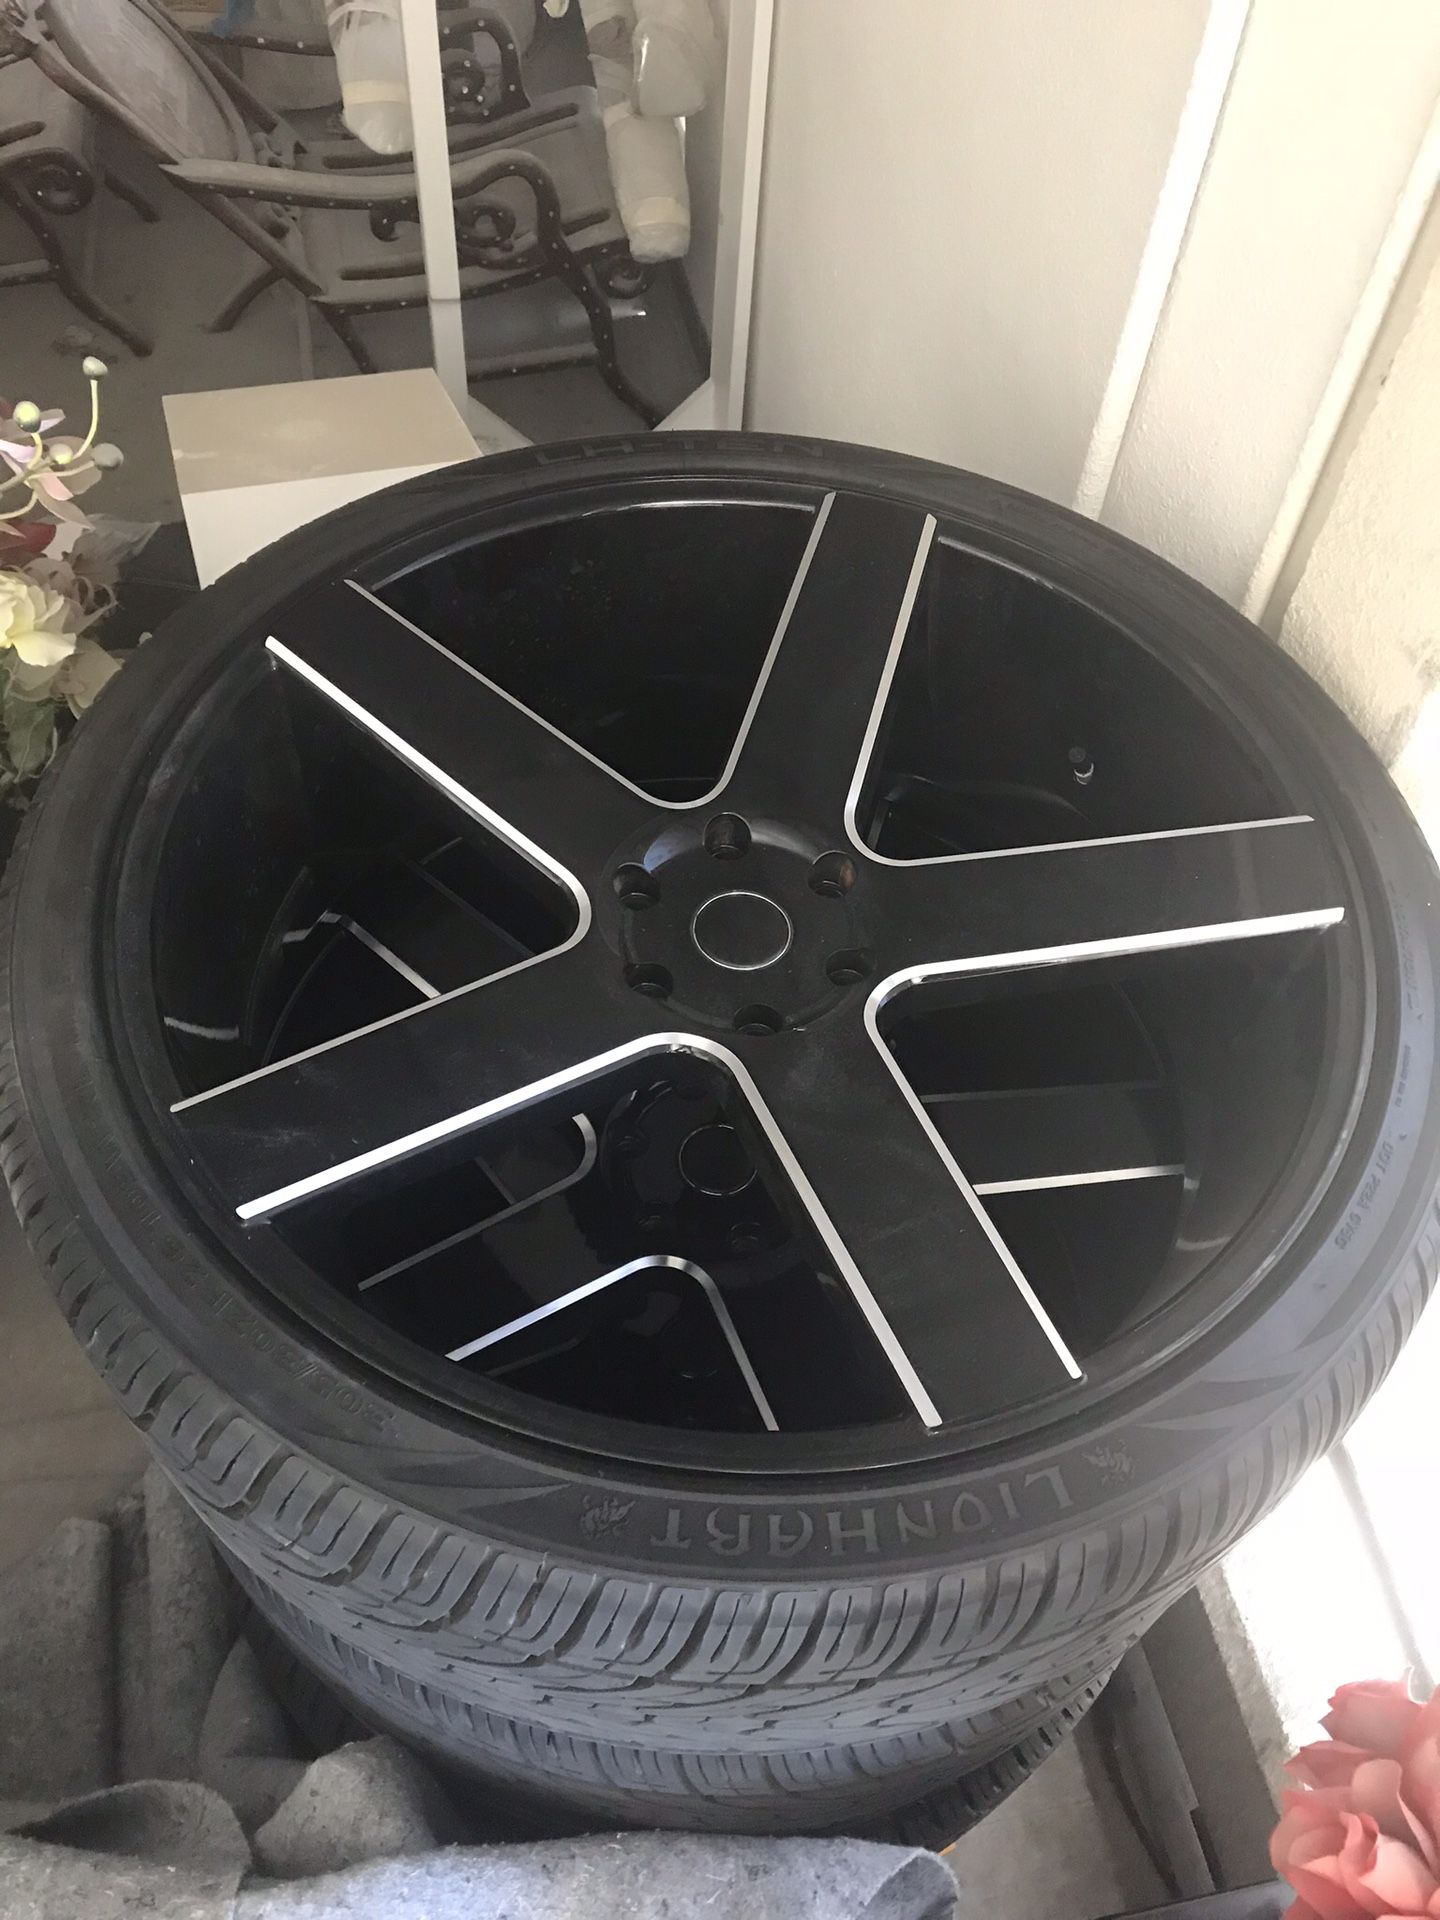 26inch Rims Tires Are In Good Condition, 1 Rim Has Damage,, With sensors